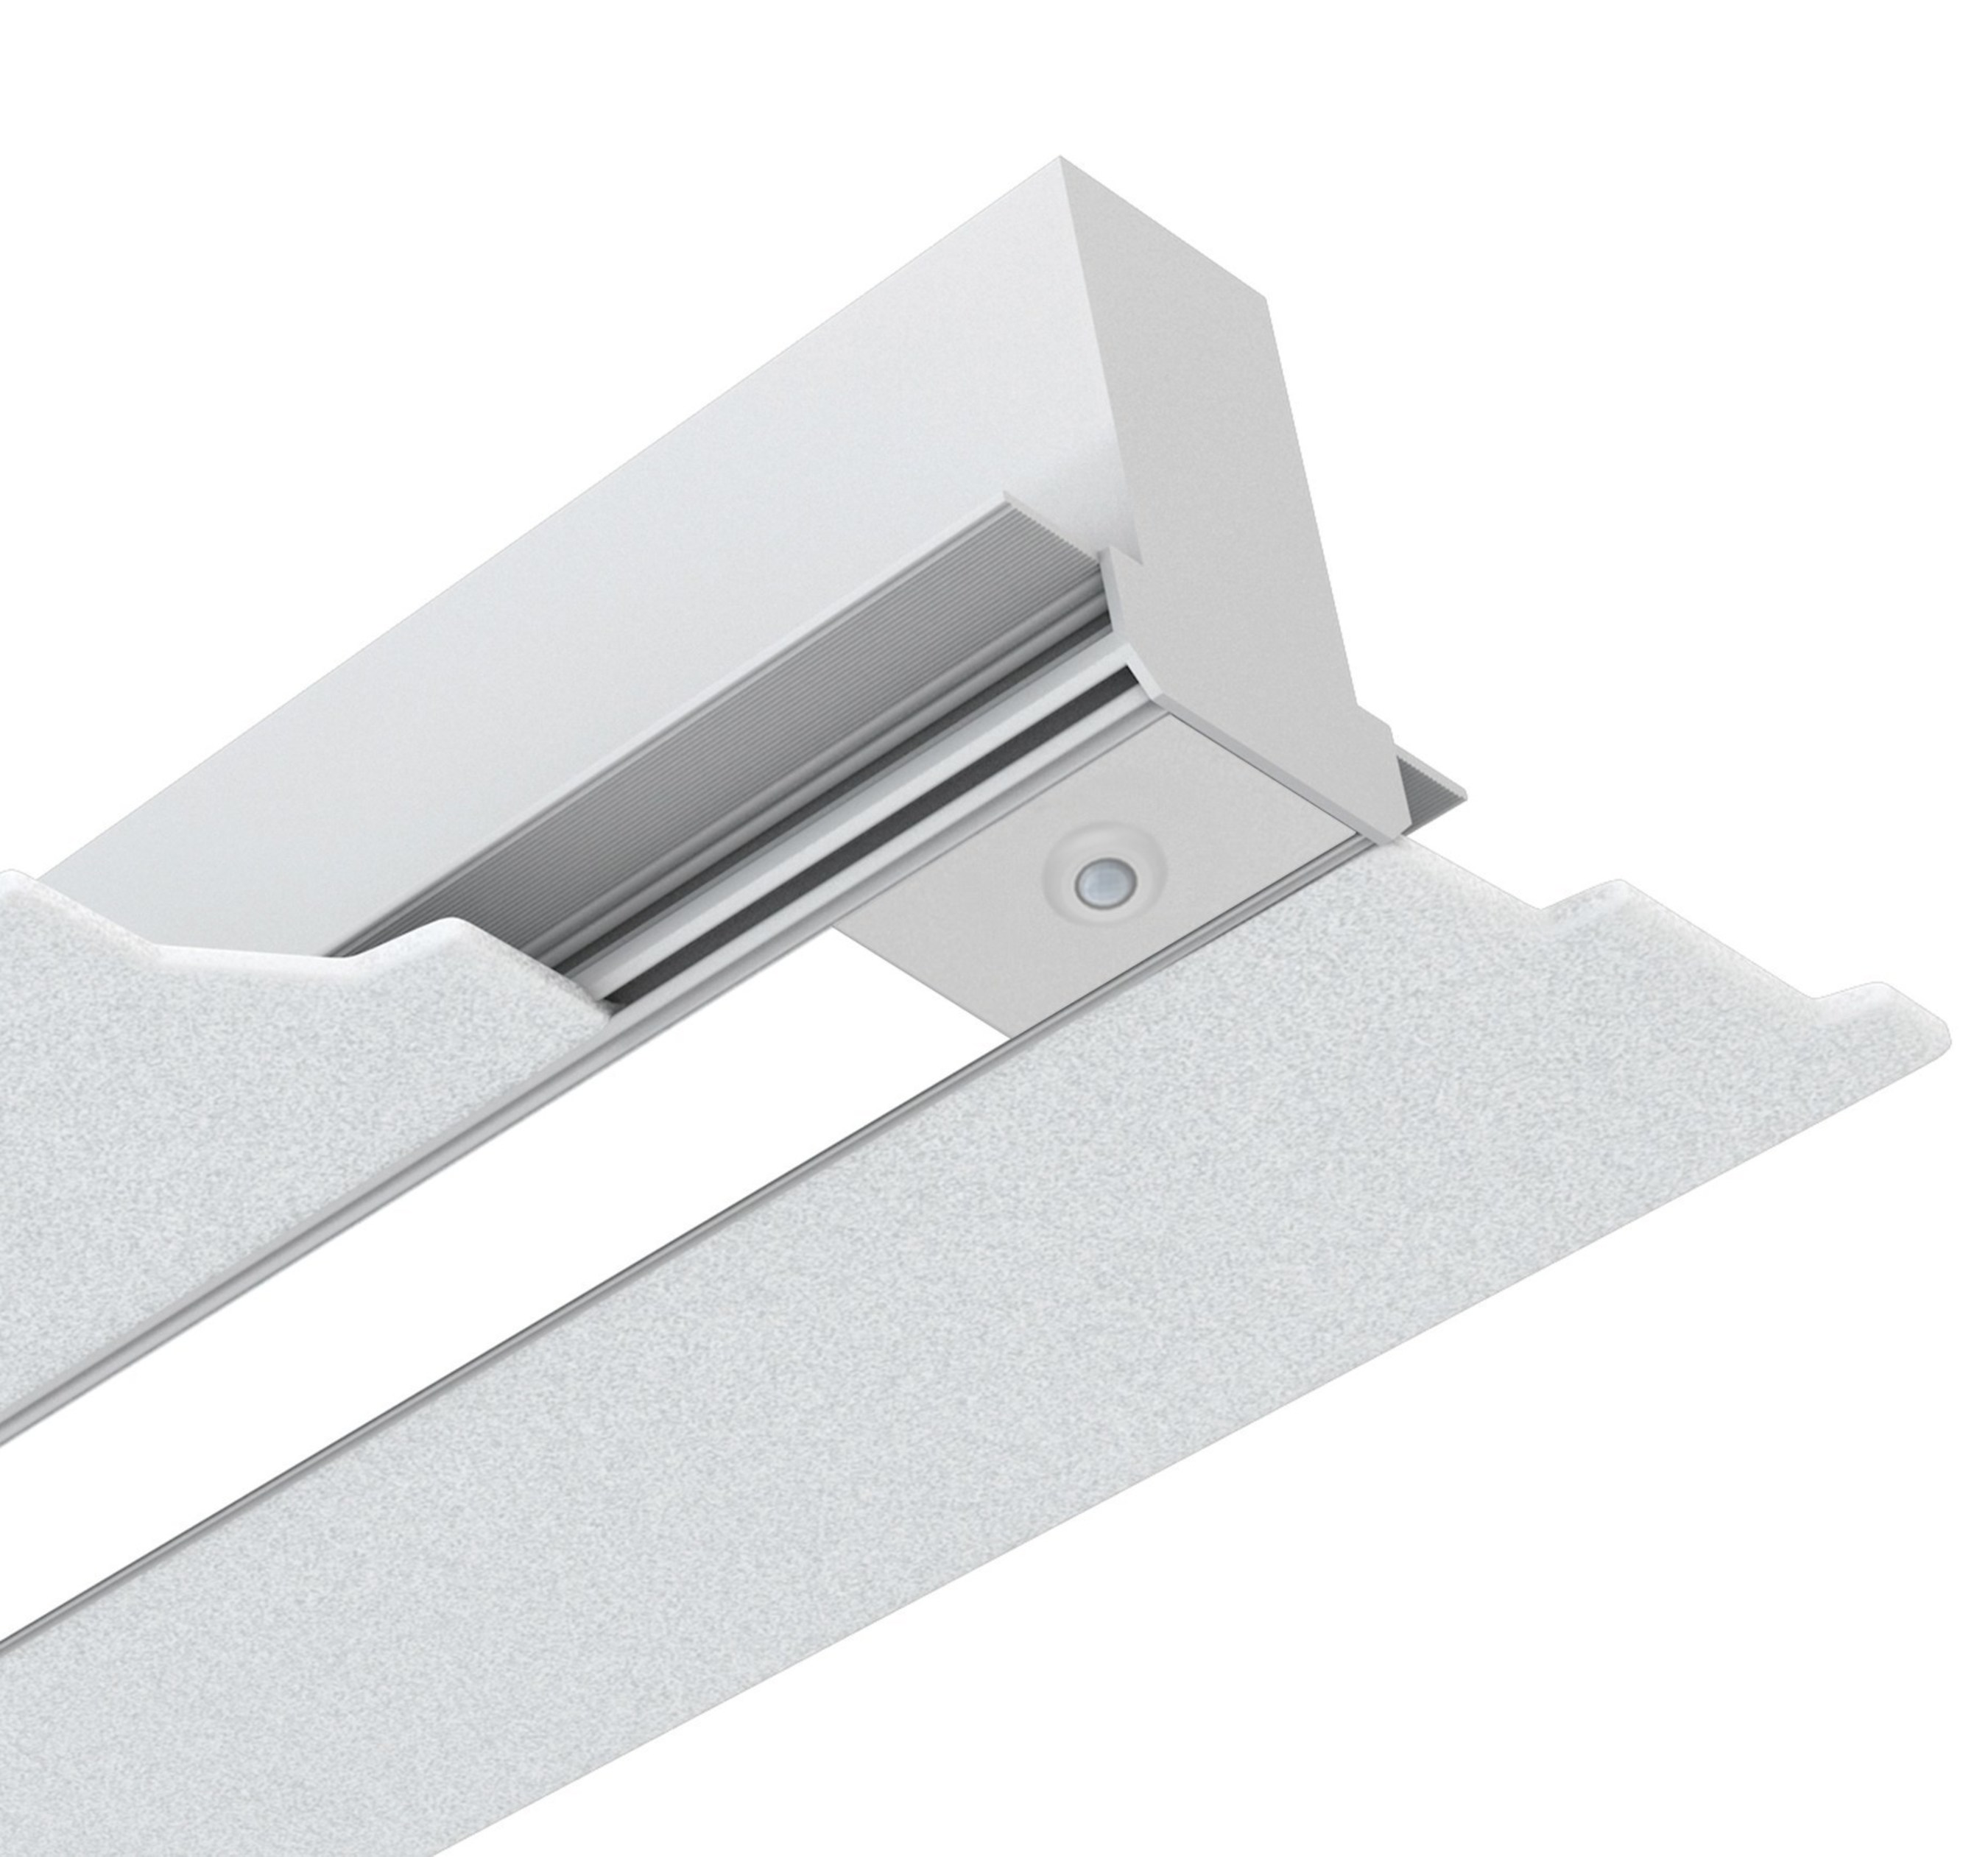 Enlighted Sensors, the most advanced digital sensors ever designed, are available with Amerlux's Gruv 1.5" recessed LED linear luminaires